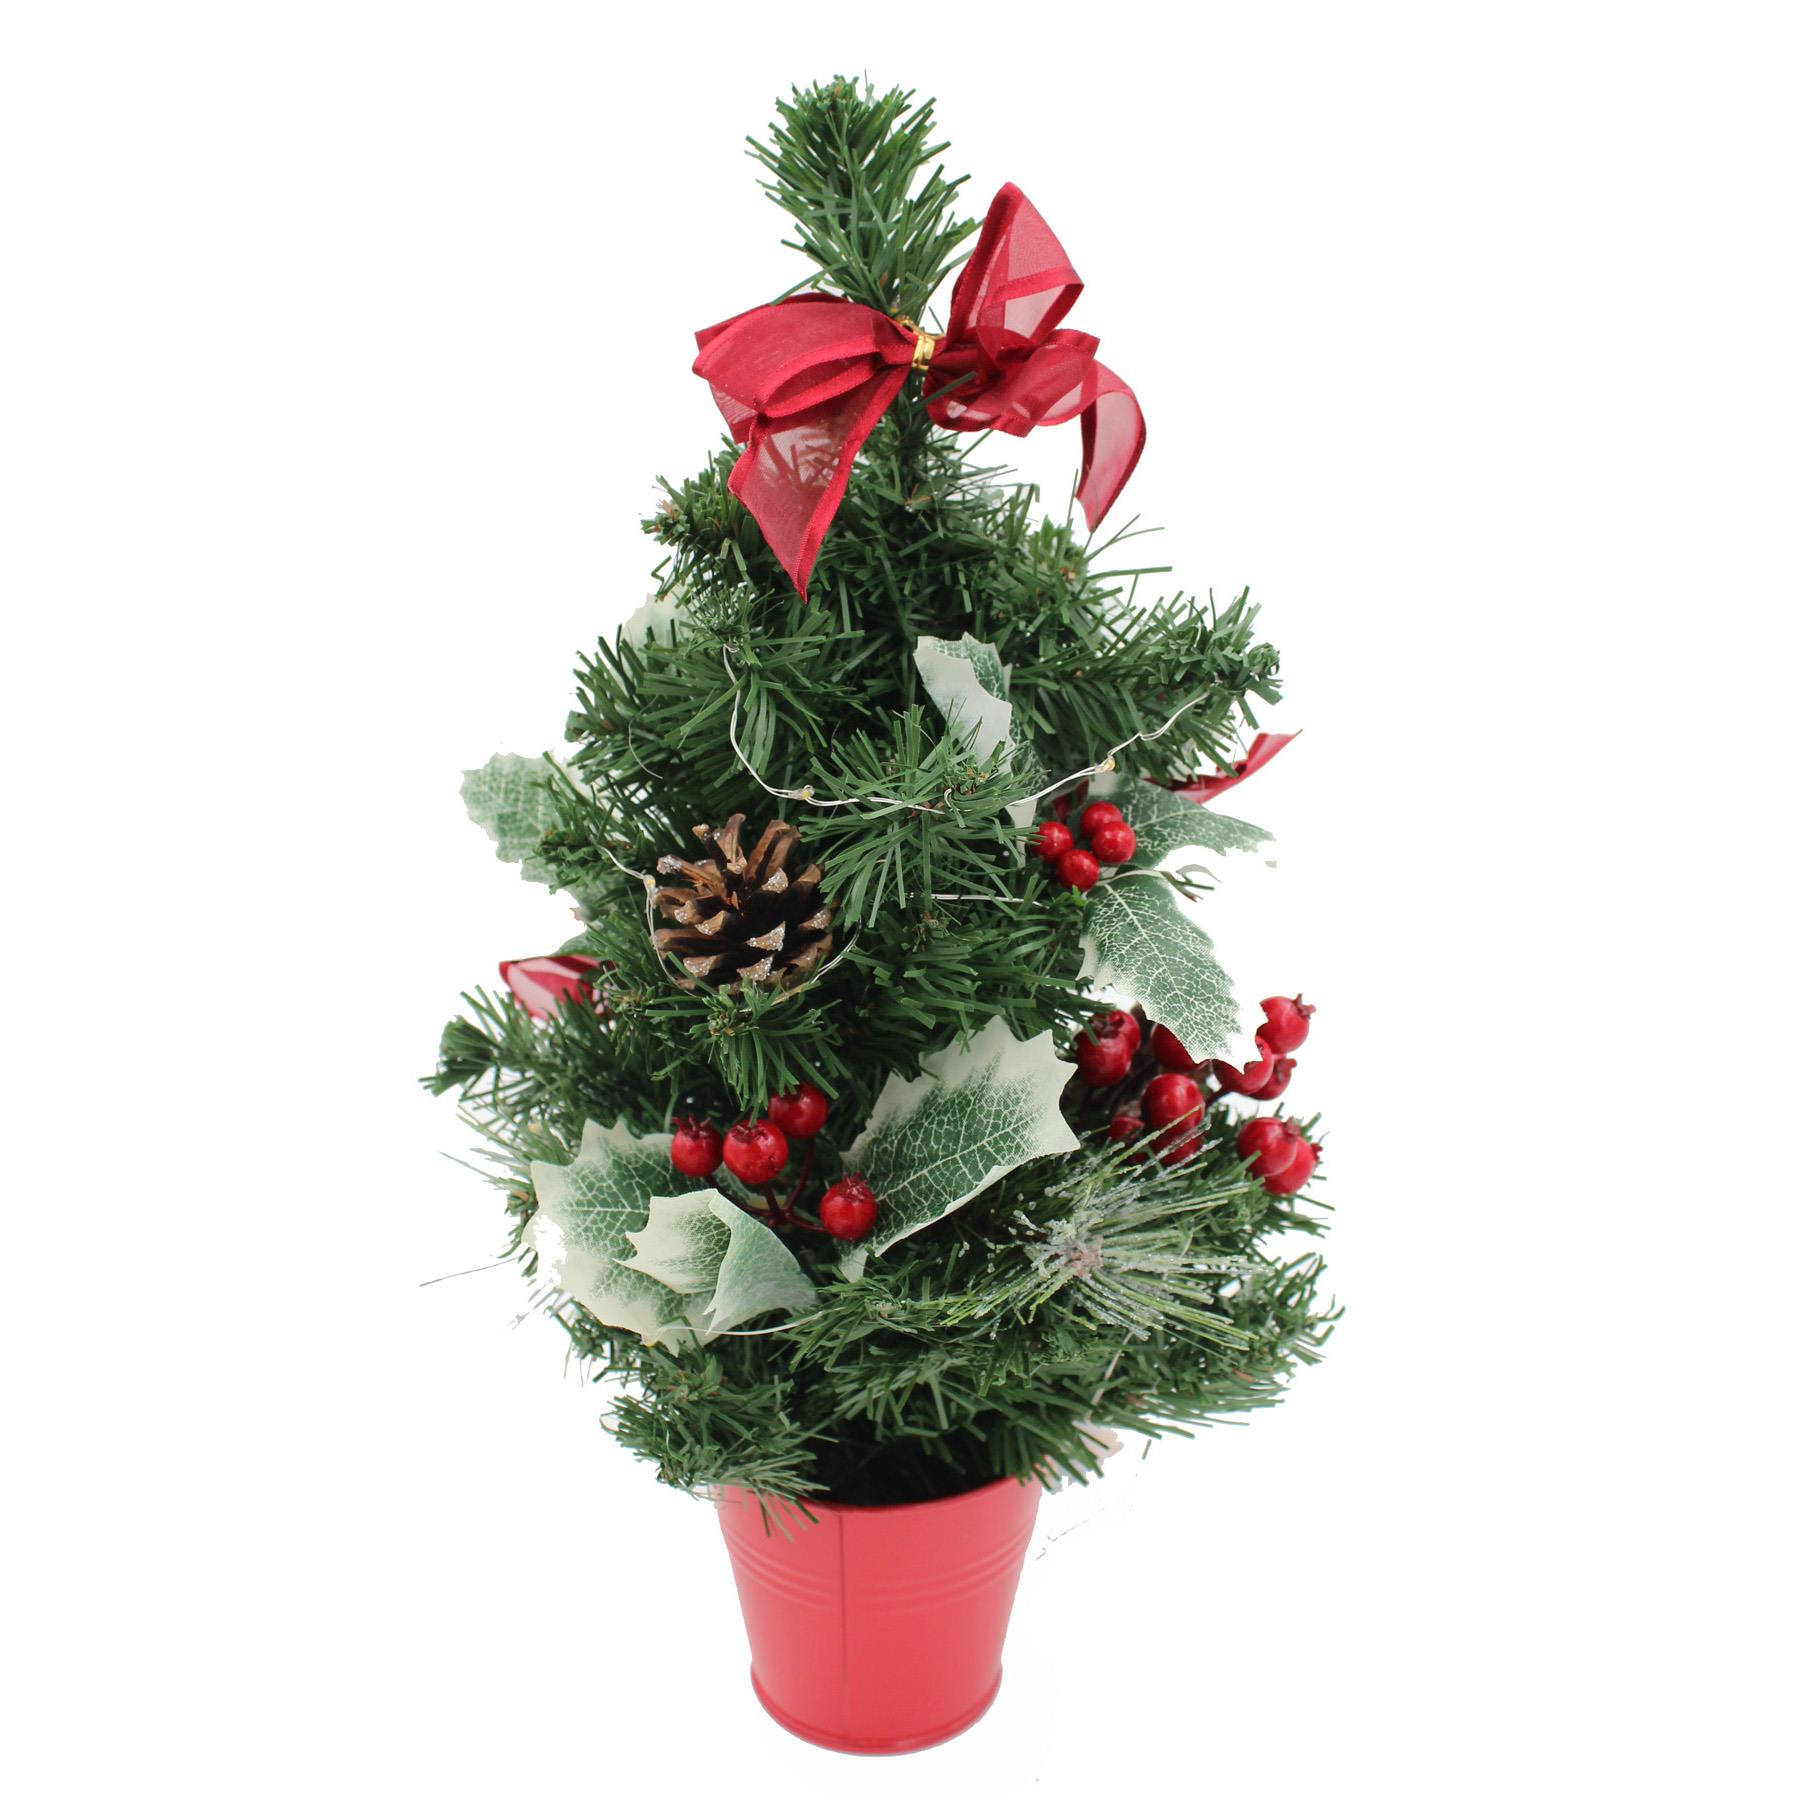 Christmas Tree with Decorations 40cm Pre-Lit Artificial Holly